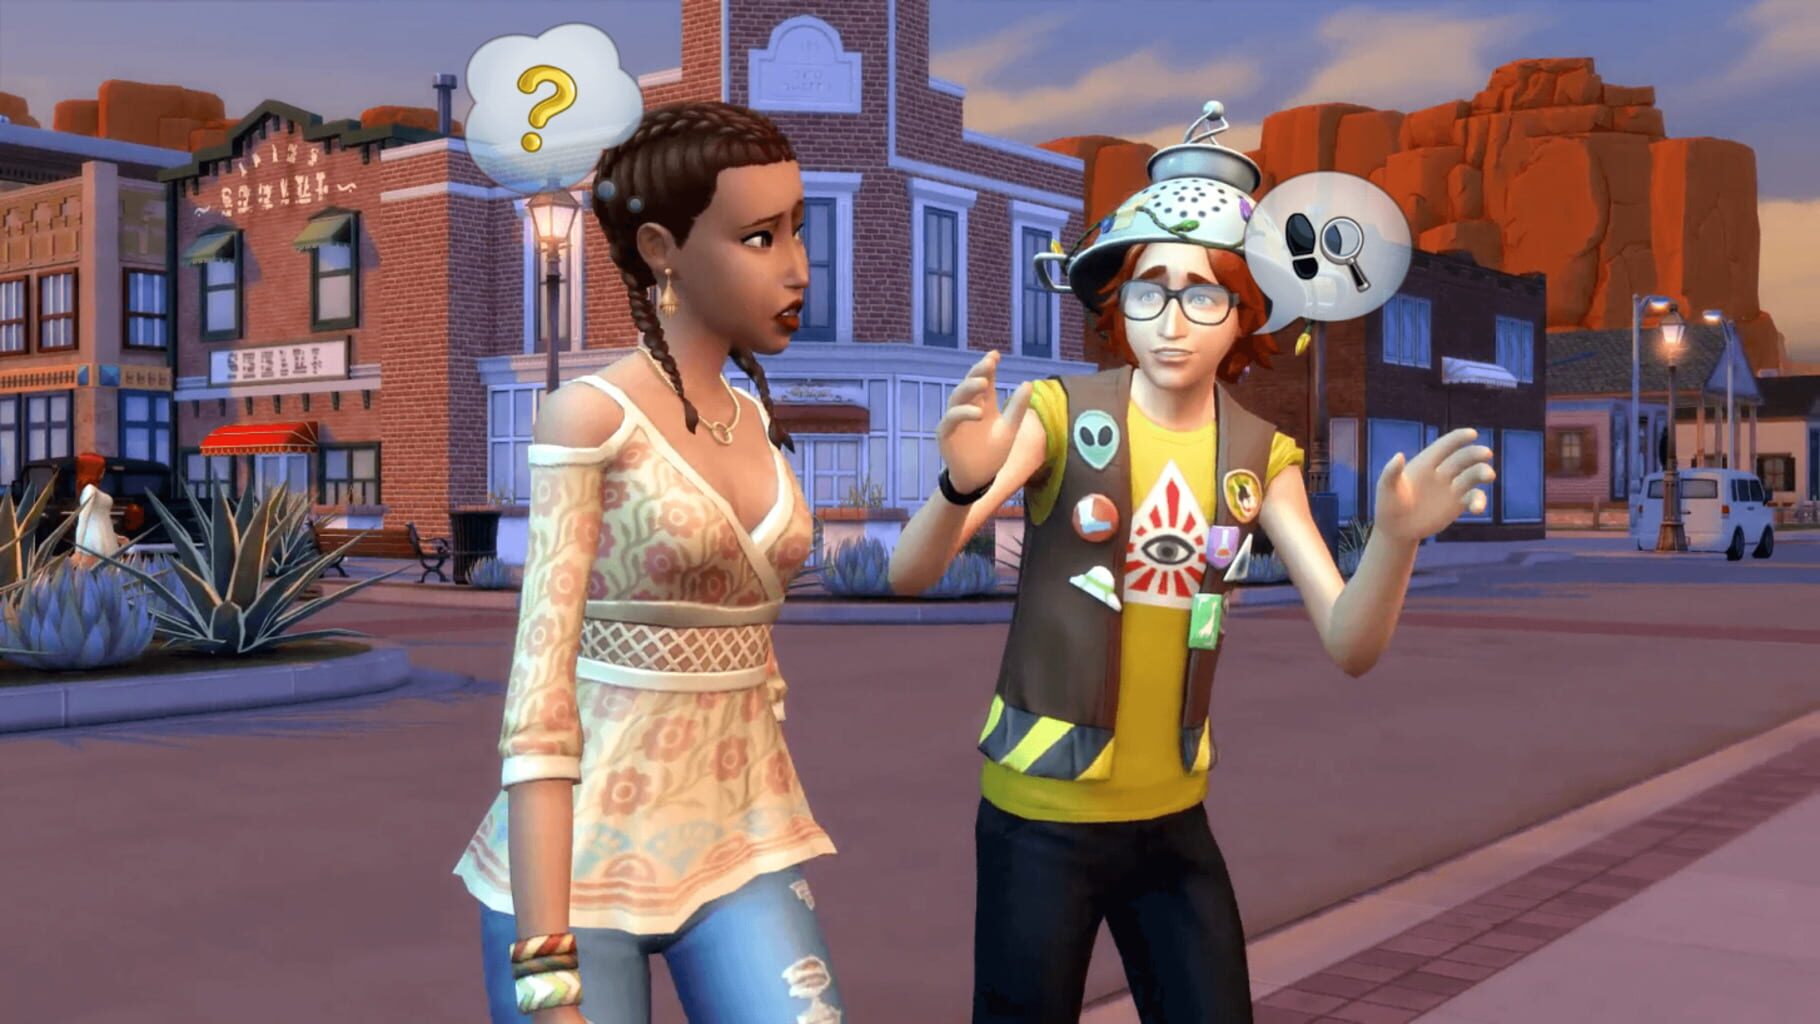 The Sims 4: StrangerVille Image